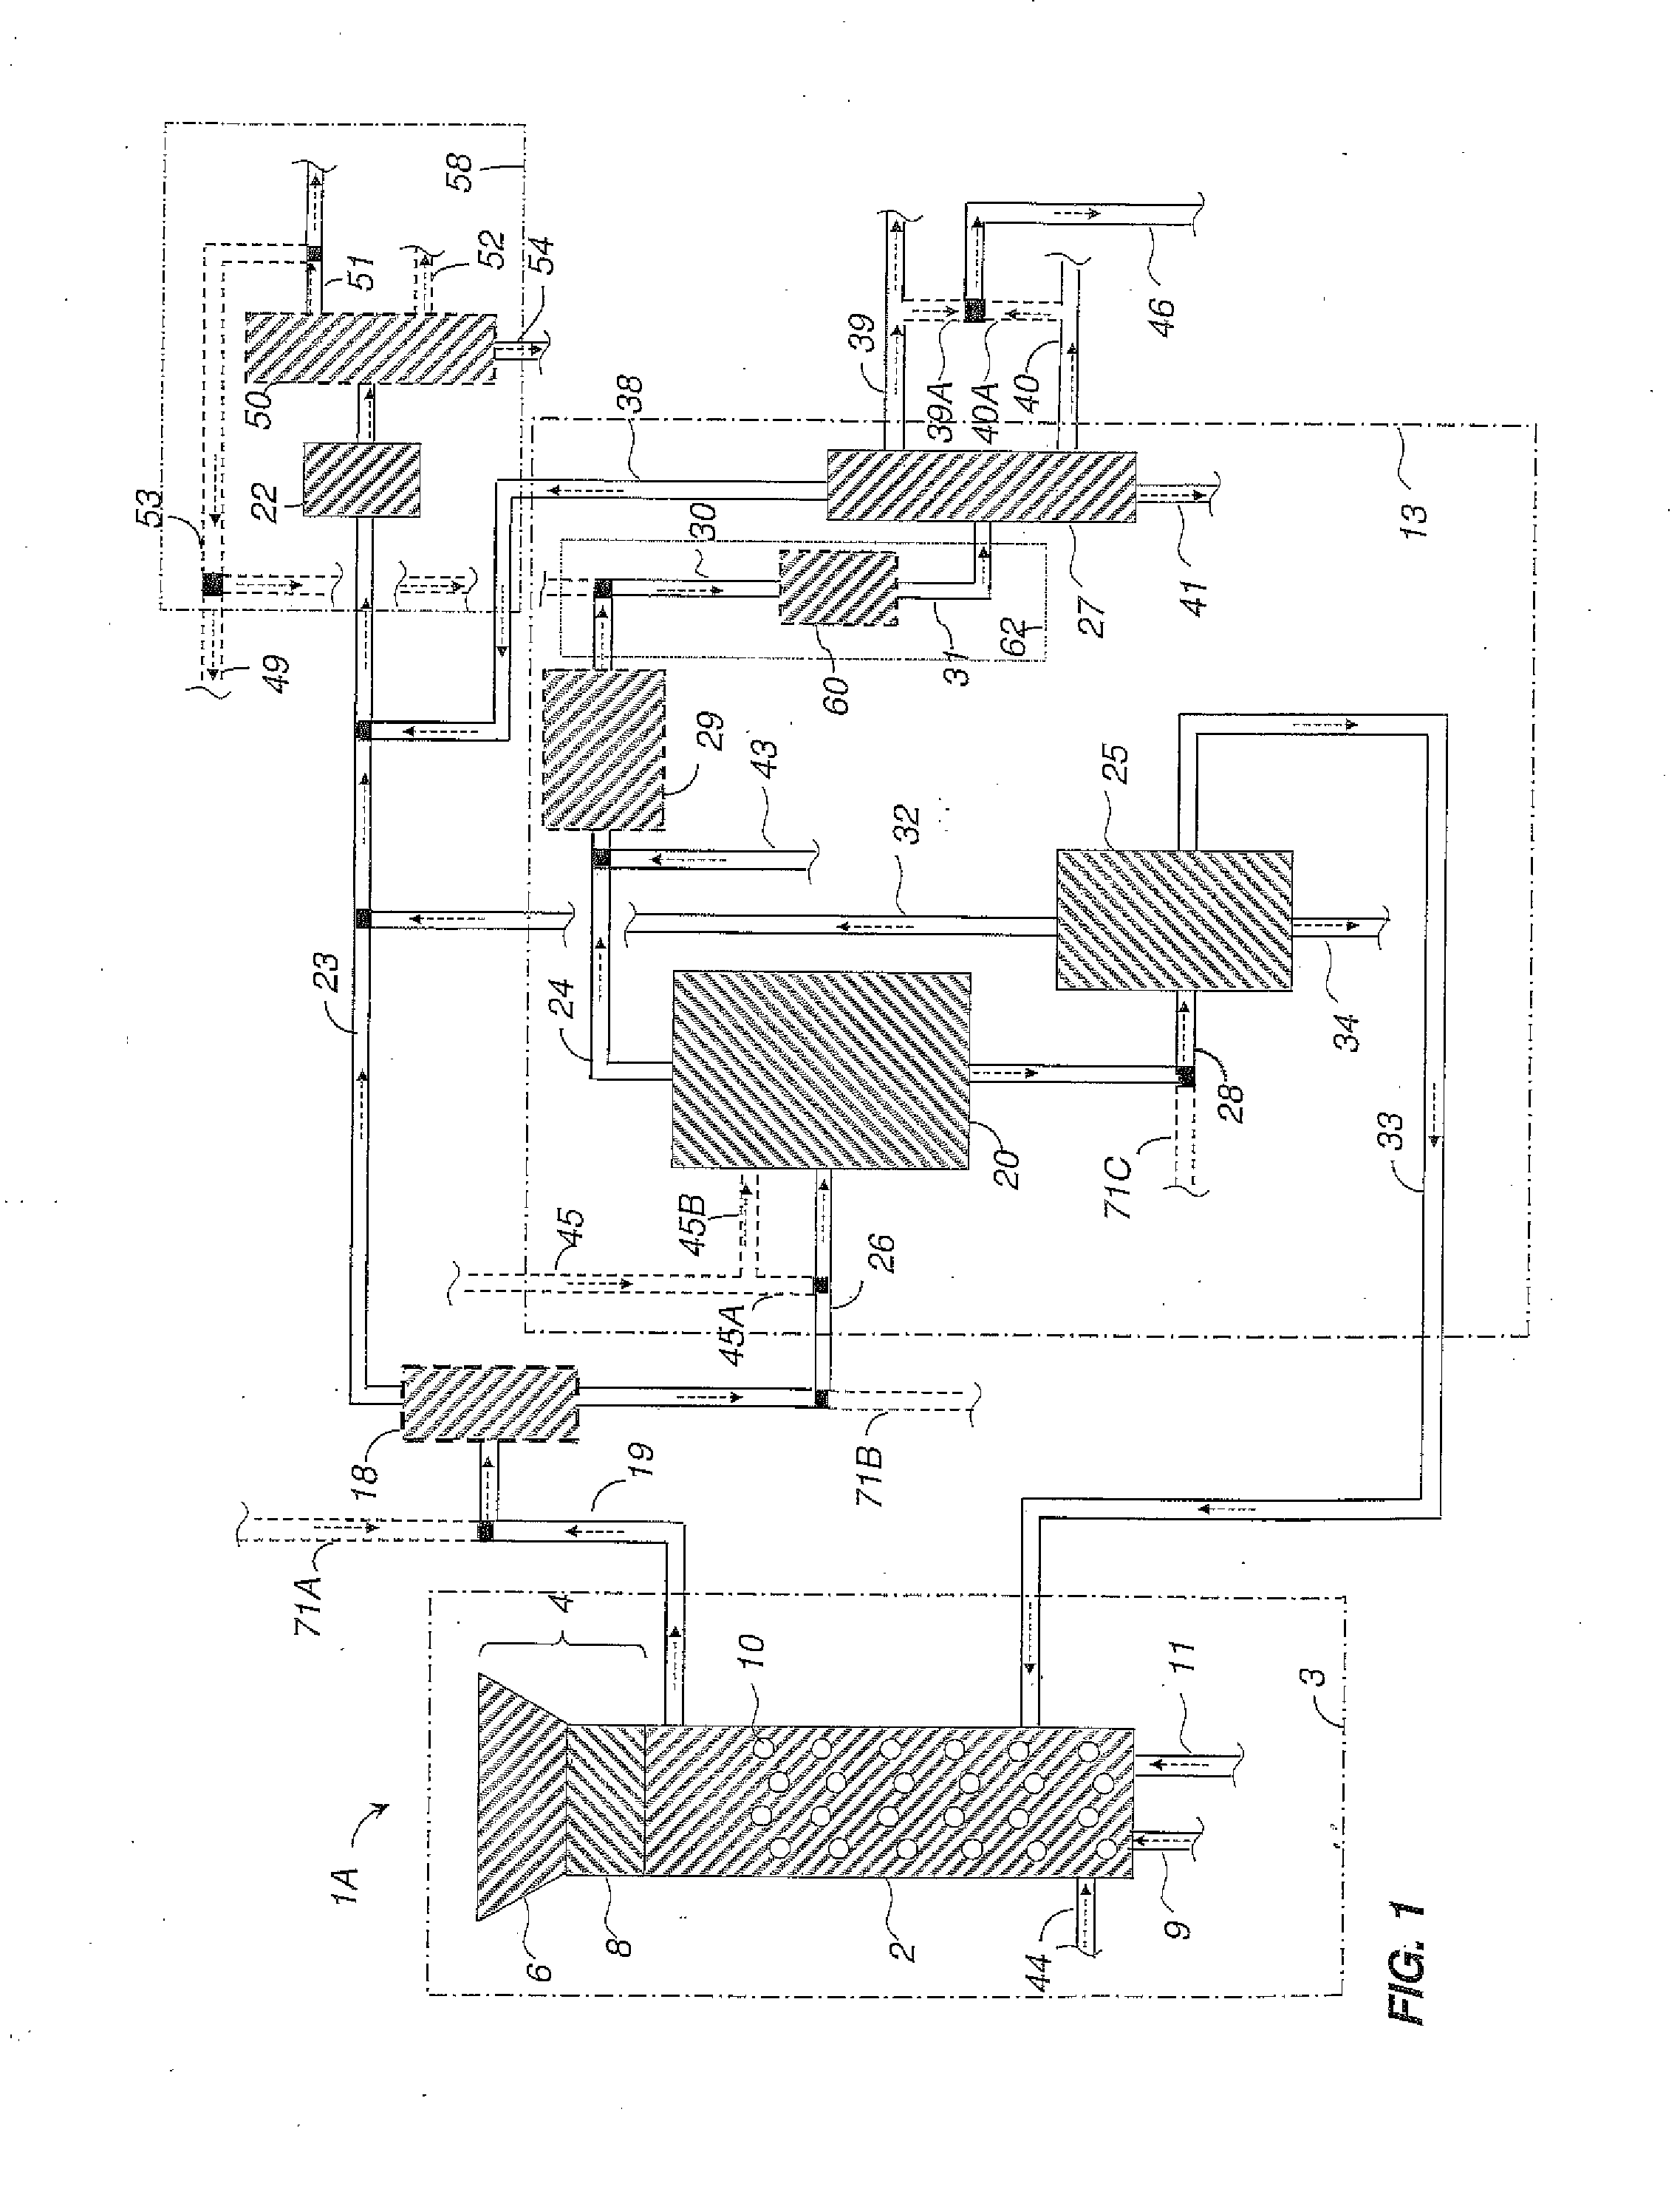 Methods and systems for processing cellulosic biomass